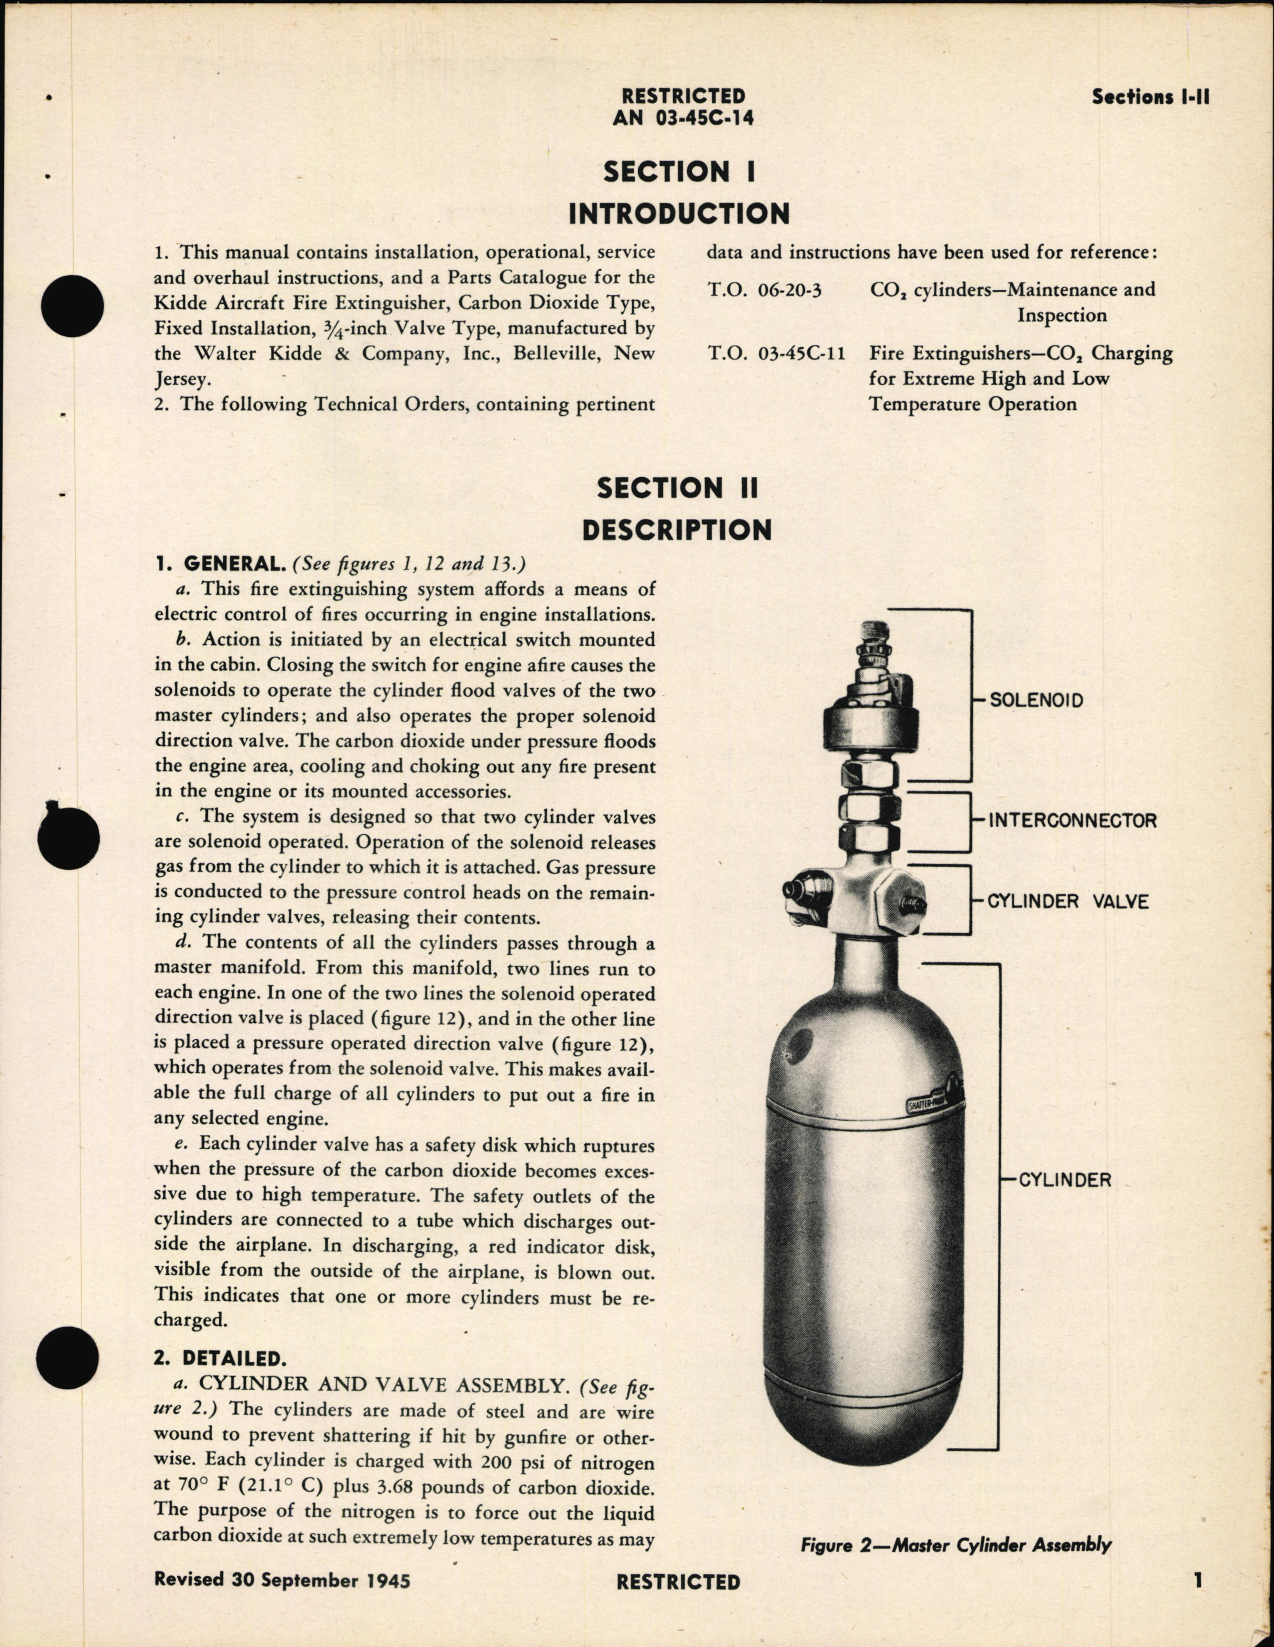 Sample page 5 from AirCorps Library document: Operation, Service, & Overhaul Instructions with Parts Catalog for Aircraft Carbon Dioxide Fire Extinguisher 3/4 Inch Valve Type